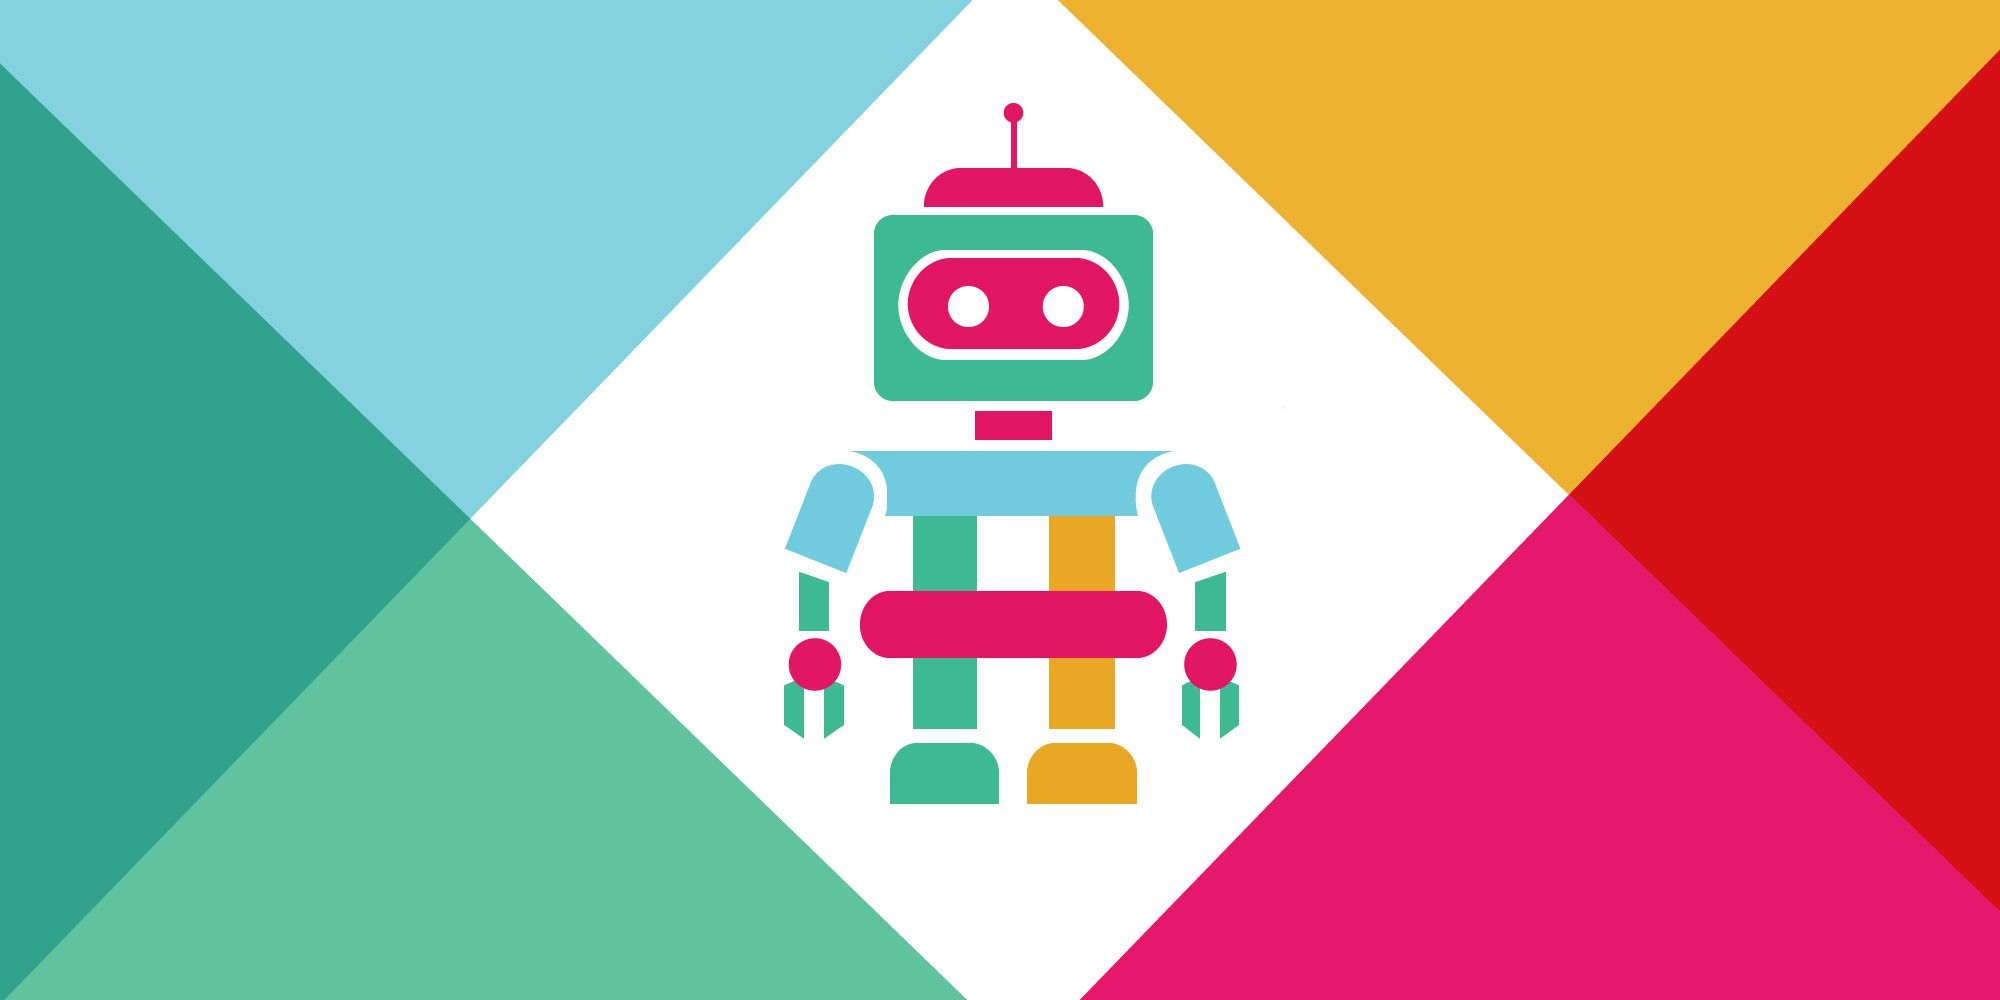 Building a Slackbot with IBM Watson, Part 1